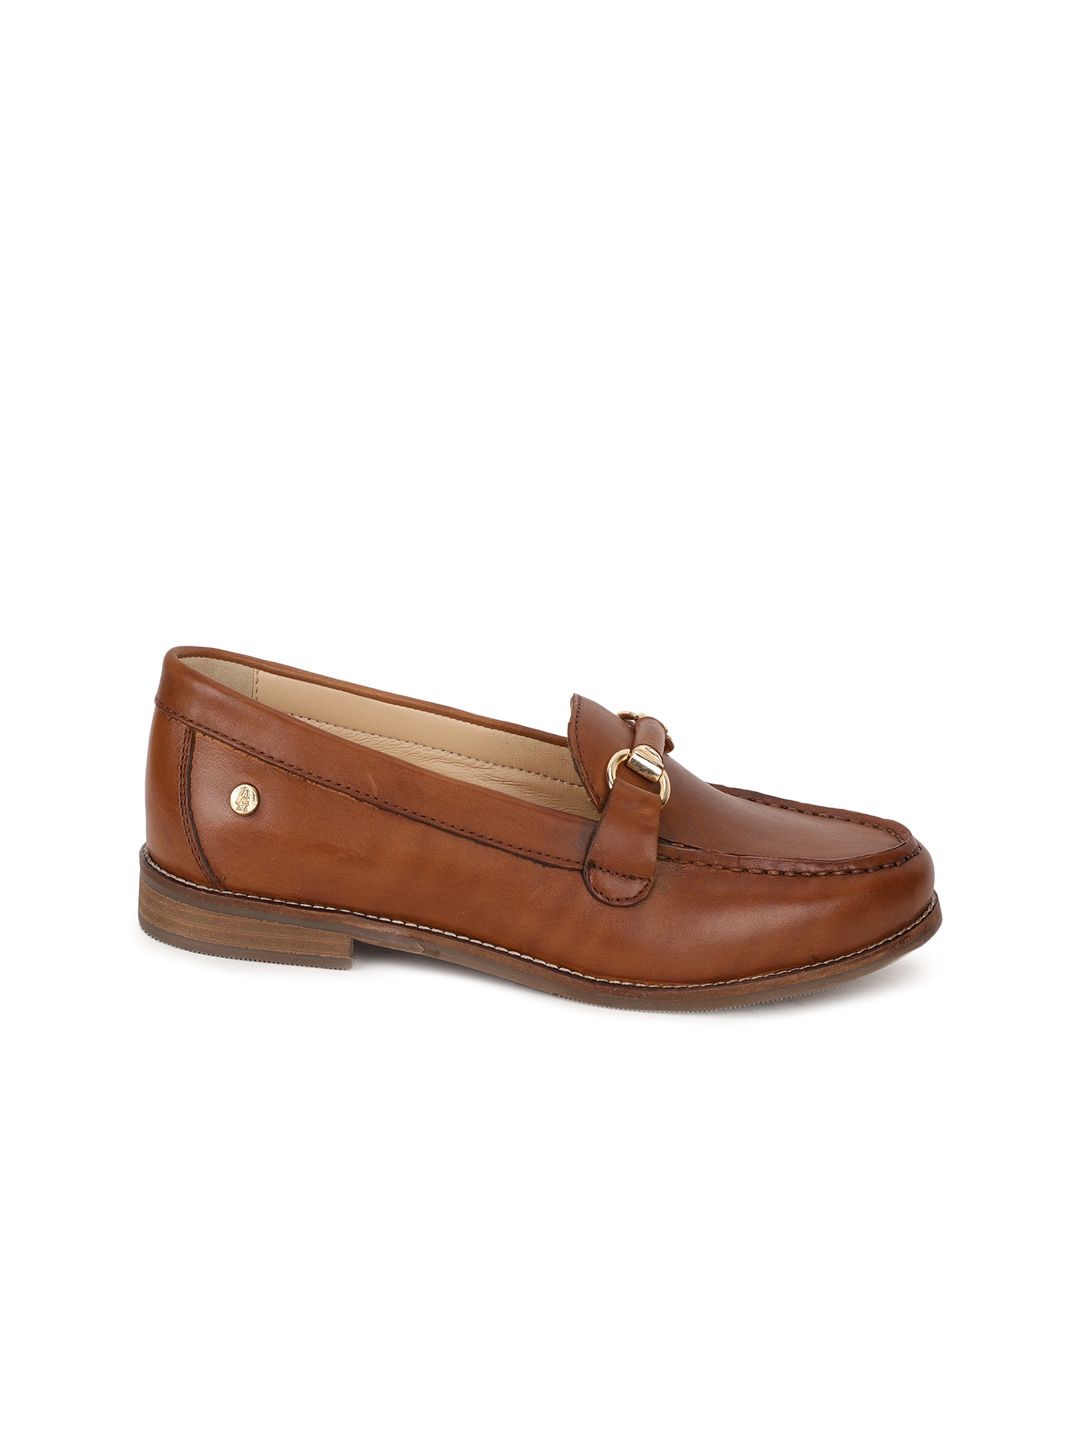 Hush Puppies Women Tan Leather Loafers Price in India